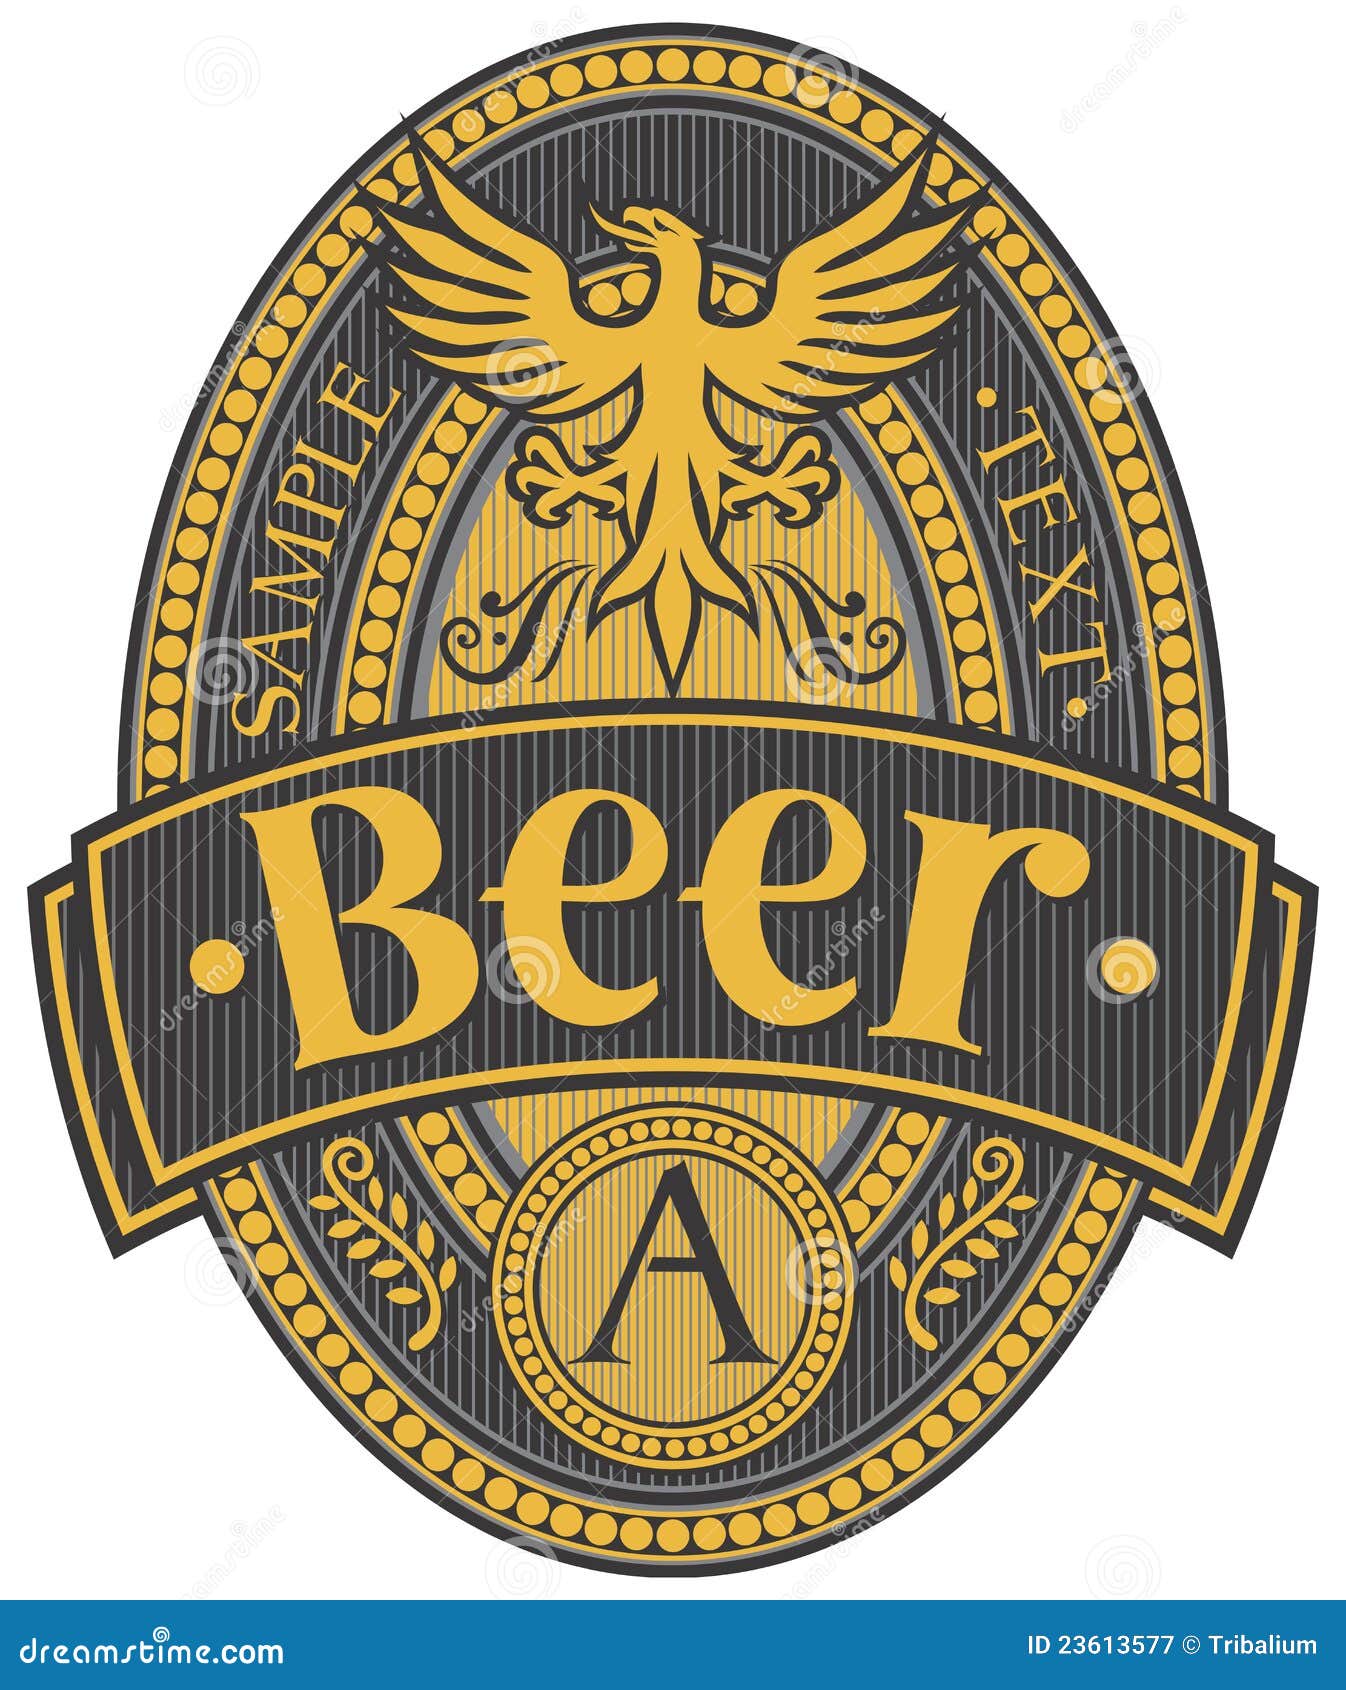 beer label clipart free - photo #40